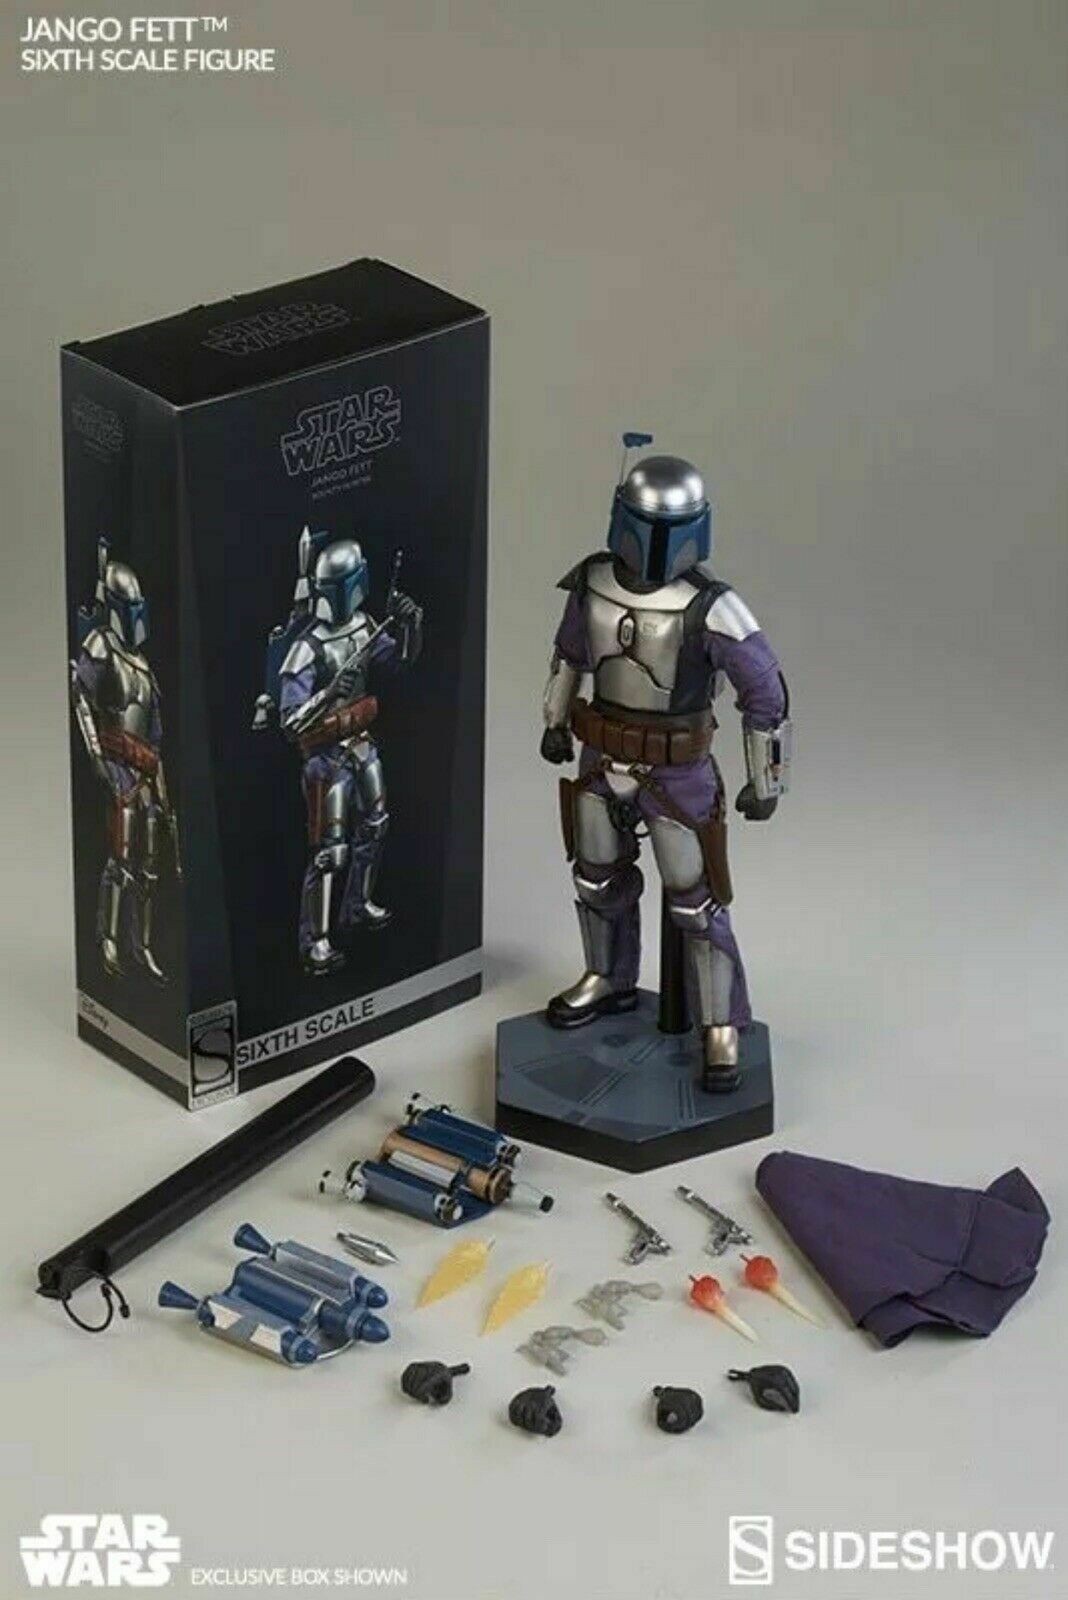 Sideshow Collectibles 1/6 Star Wars Episode II Attack of the Clones Jango Fett Sixth Scale Figure 1